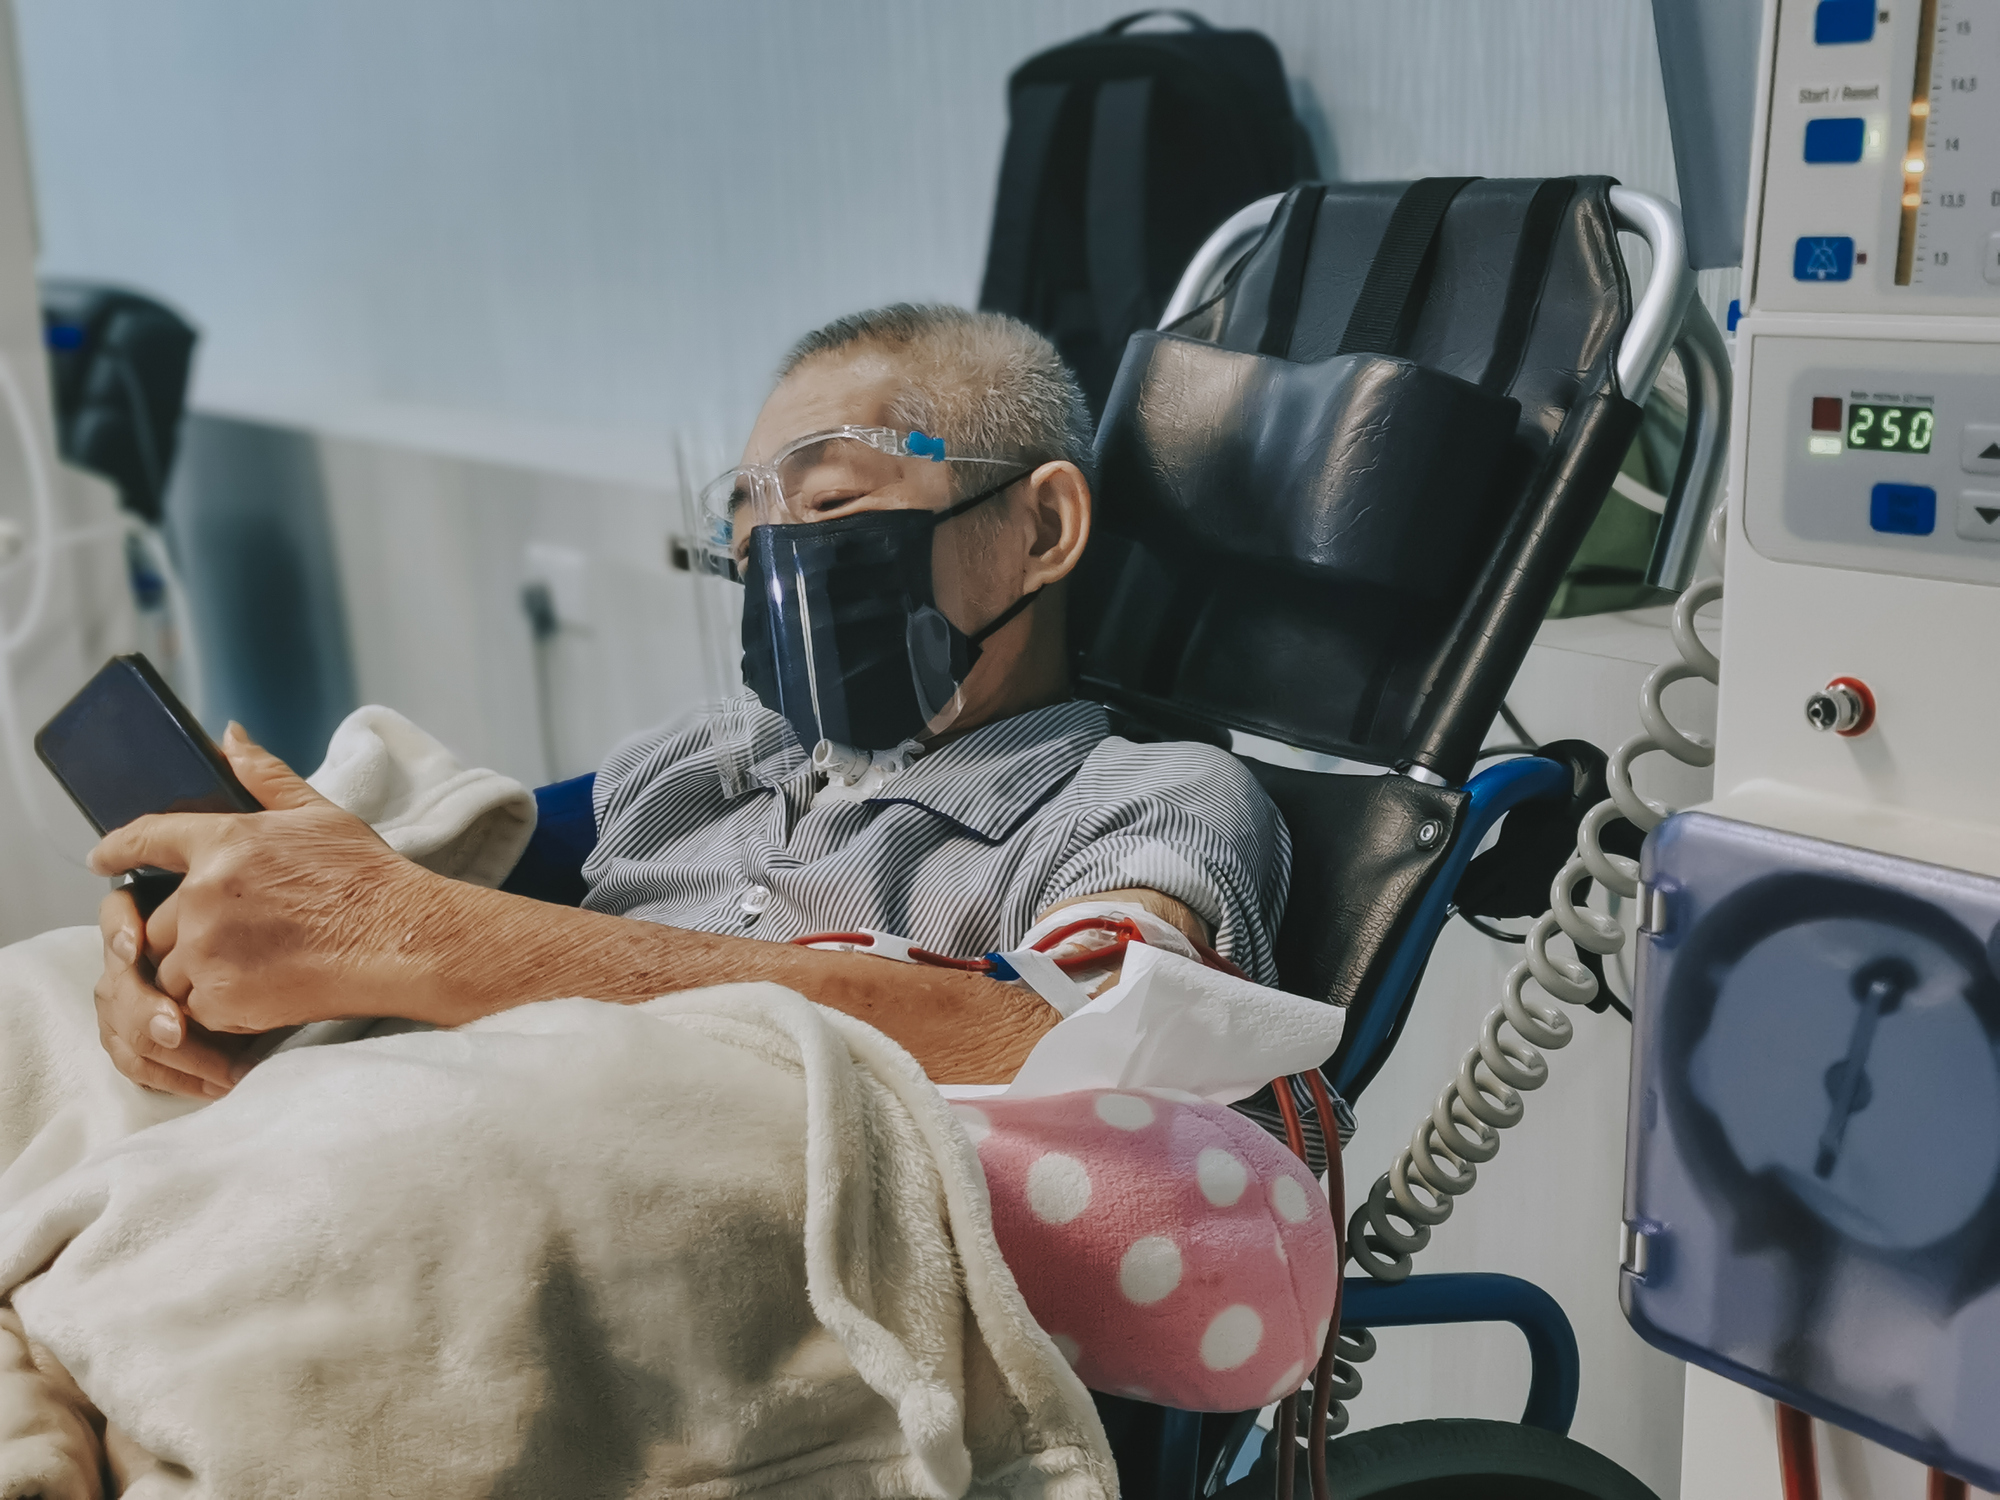 Masked patient looking at his phone while undergoing the kidney dialysis process